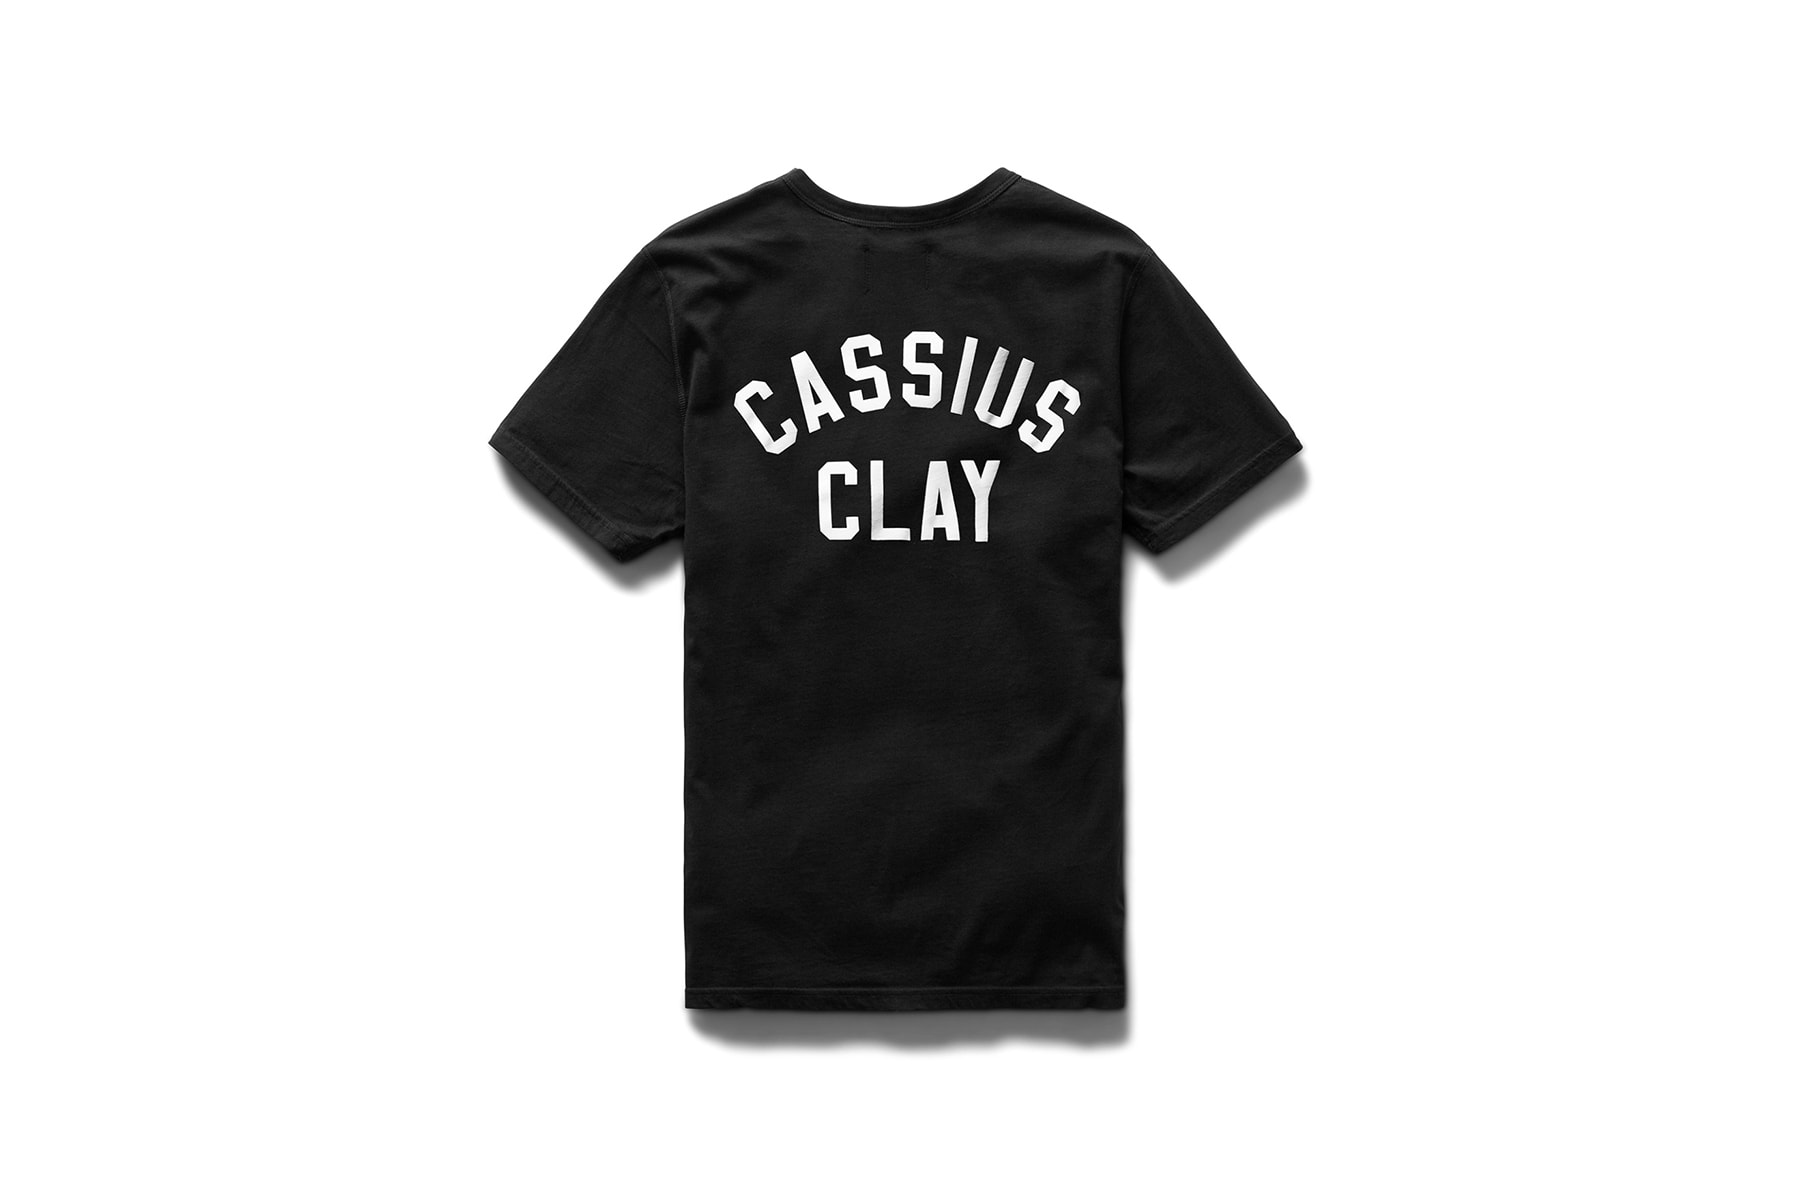 muhammad ali cassius clay reigning champ collaboration august 2 2018 black tee shirt logo back